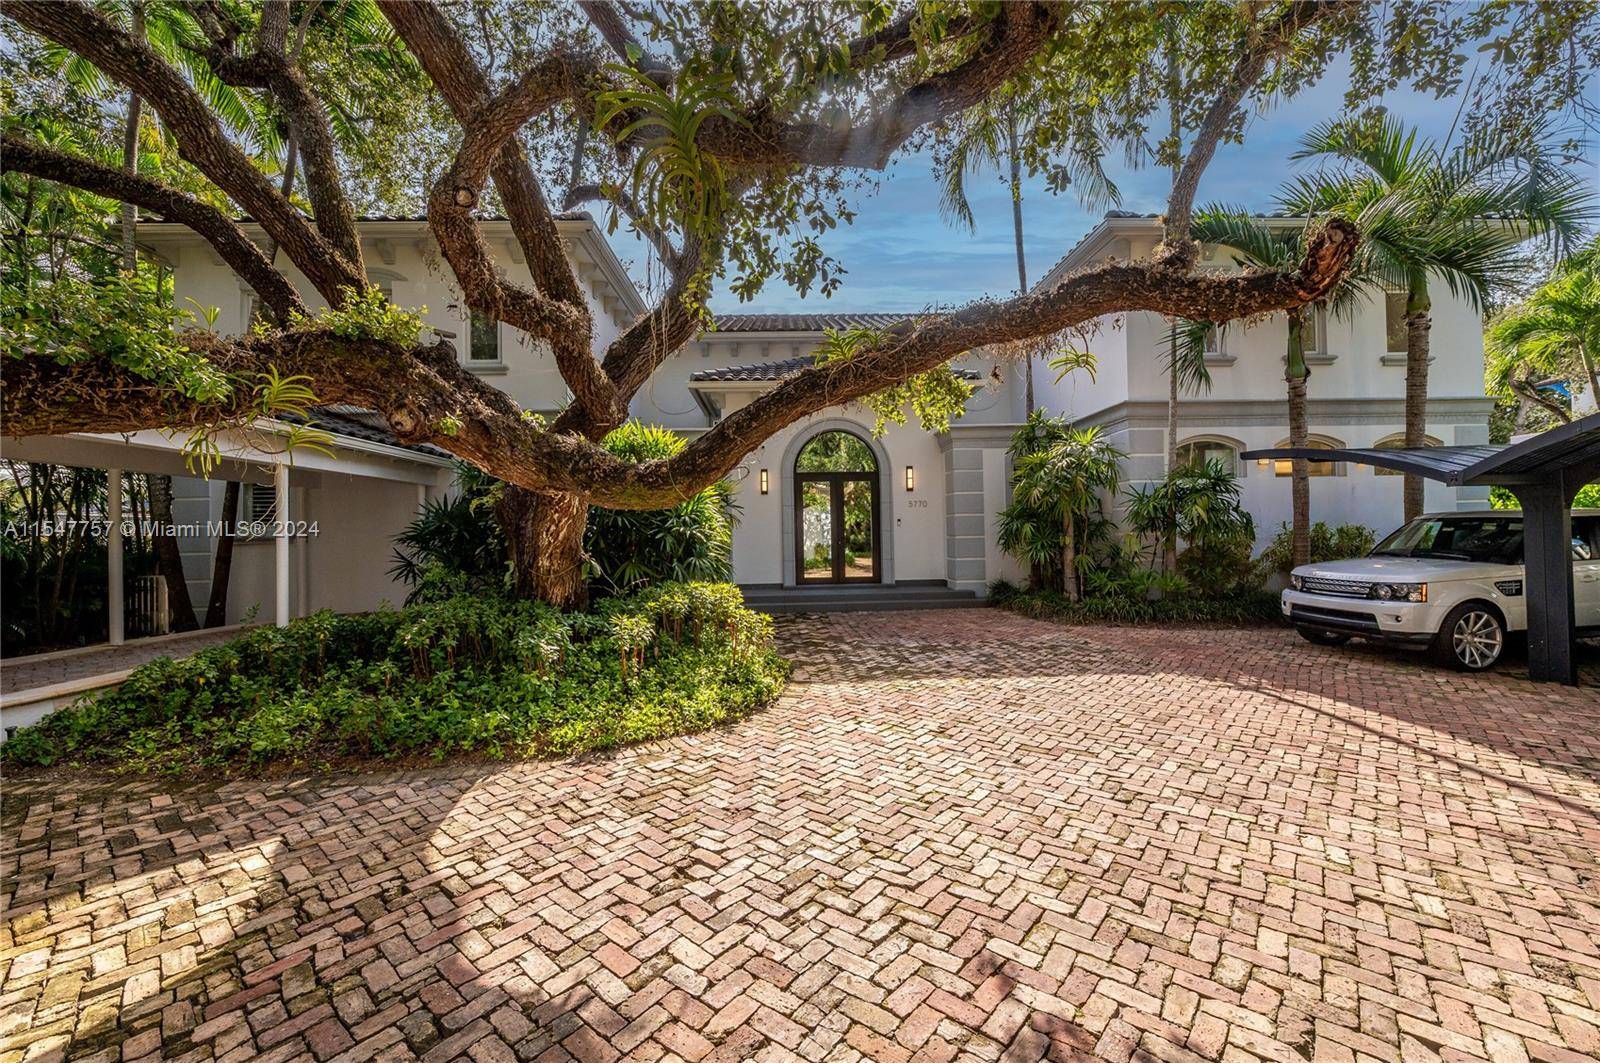 Mediterranean gem, ideally located on a private street, in the beautiful gated community of Palms Estates.